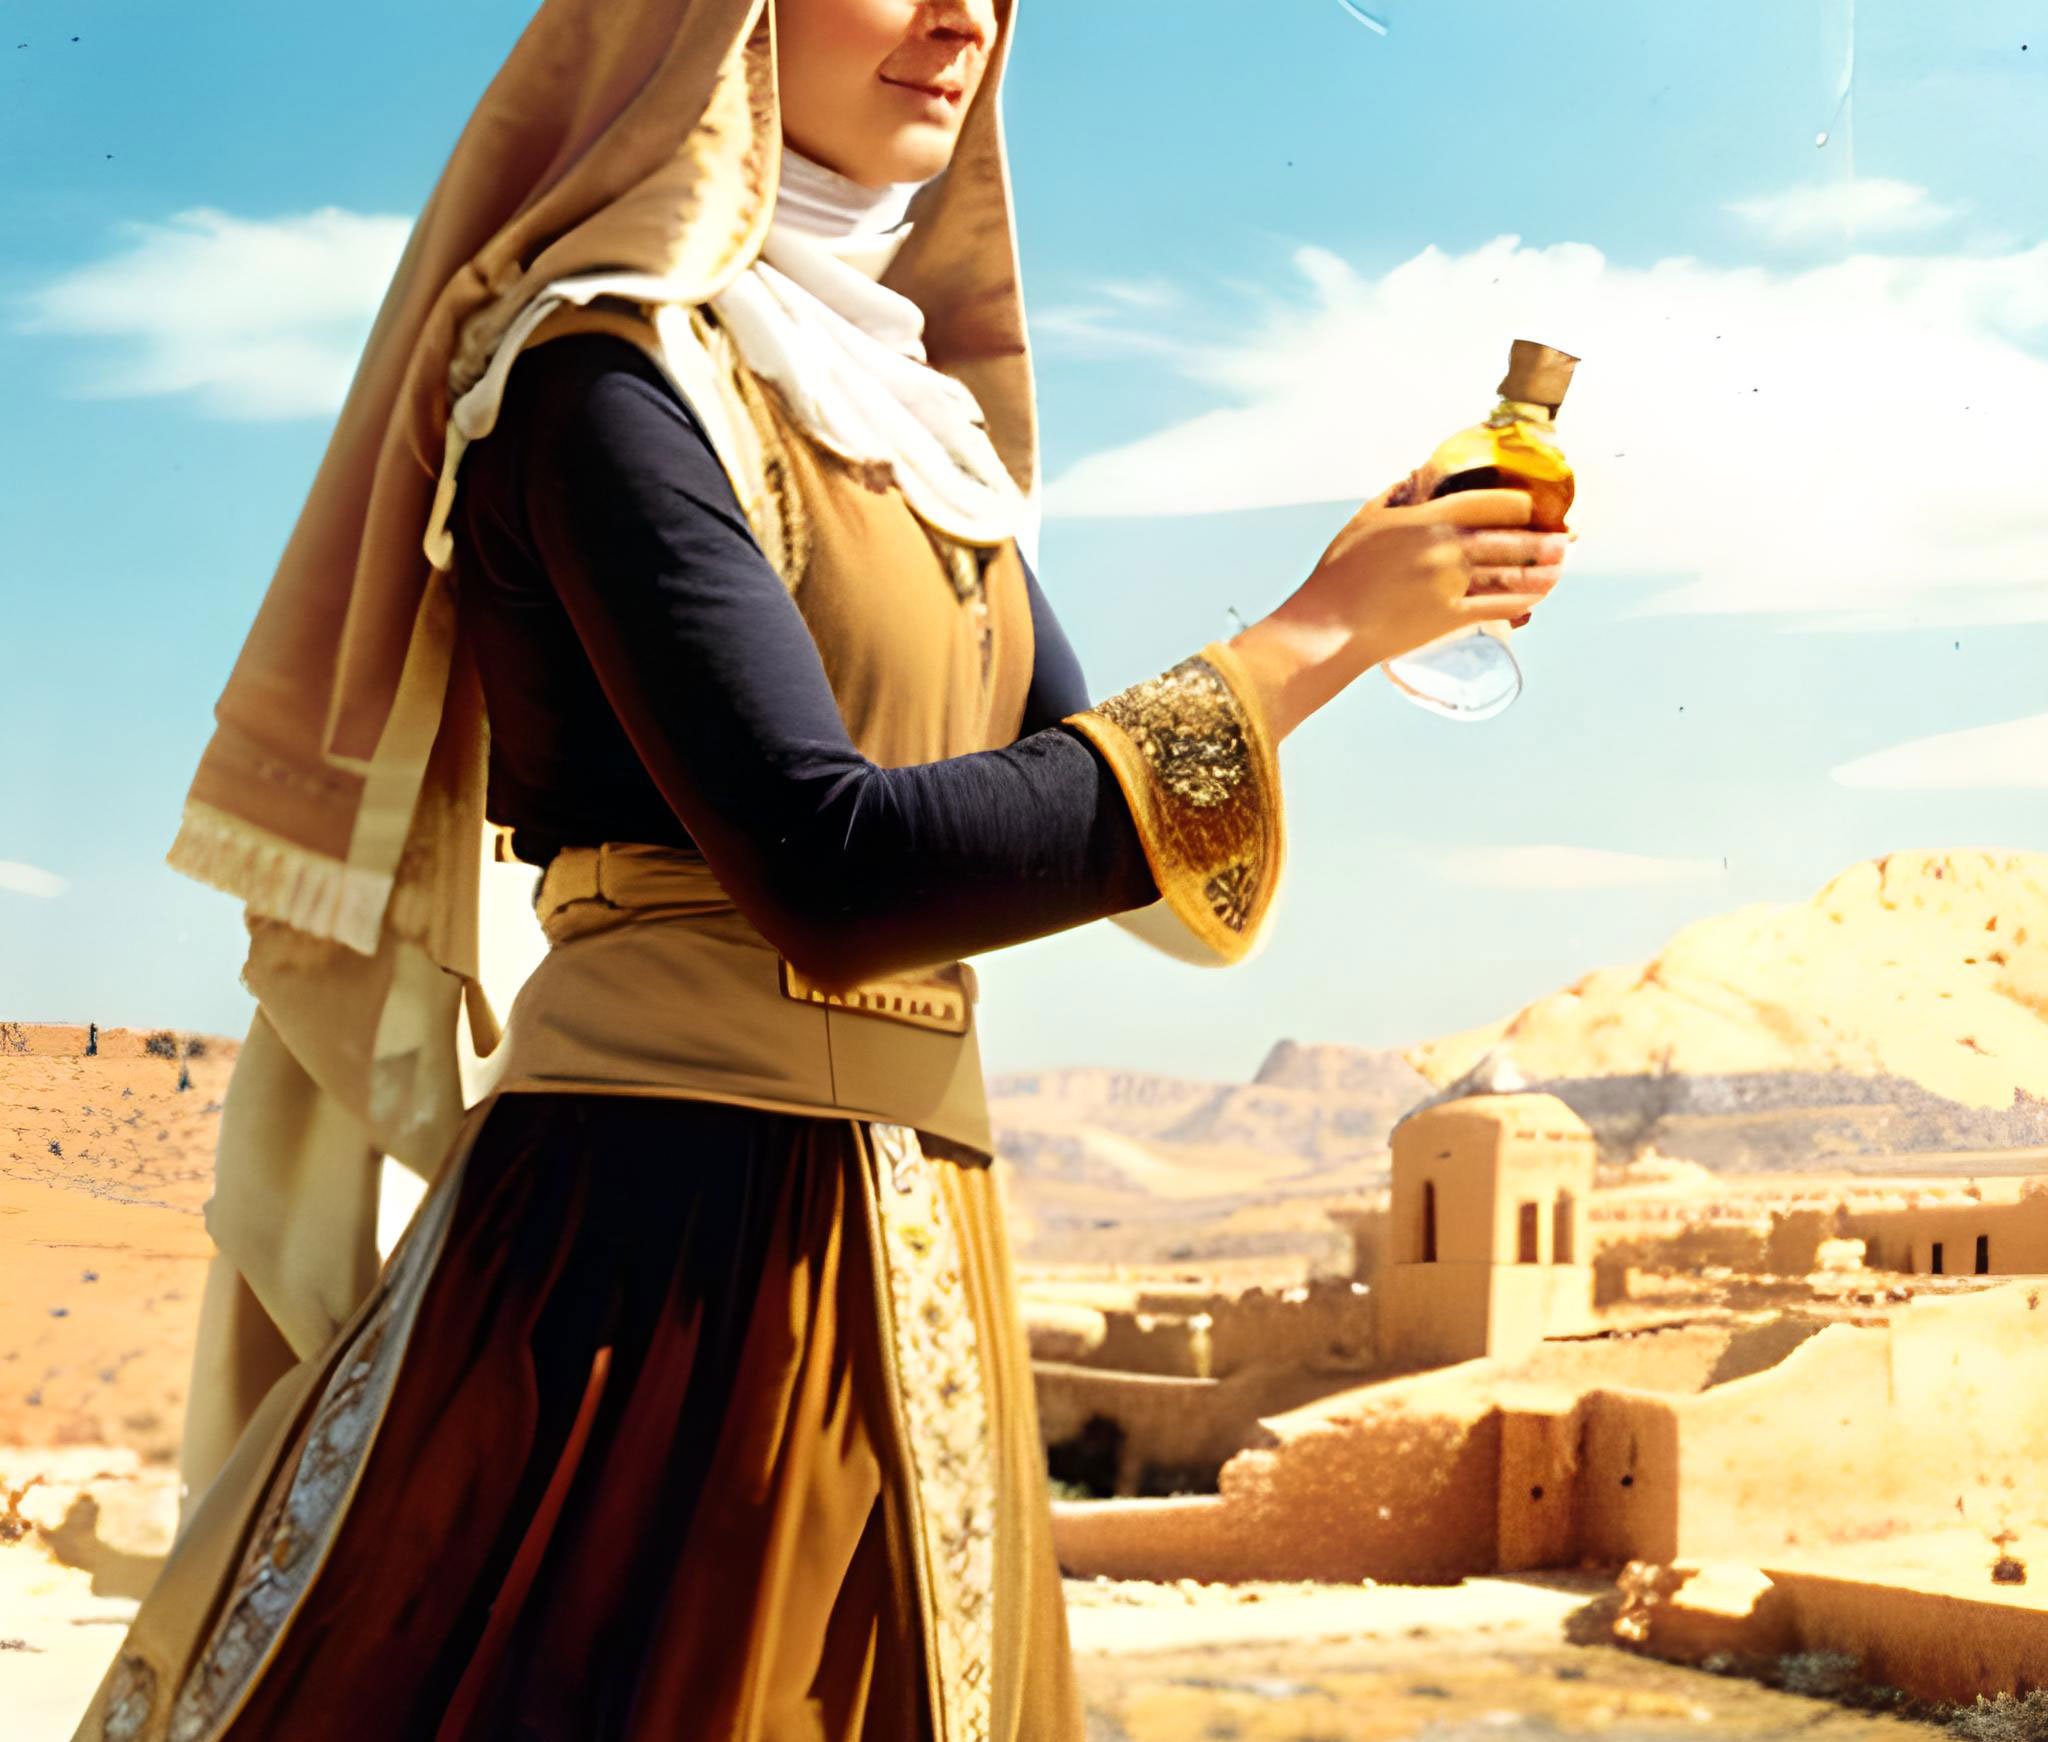 A women holding a bottle filled with argan oil in a desert with an ancient city in the background